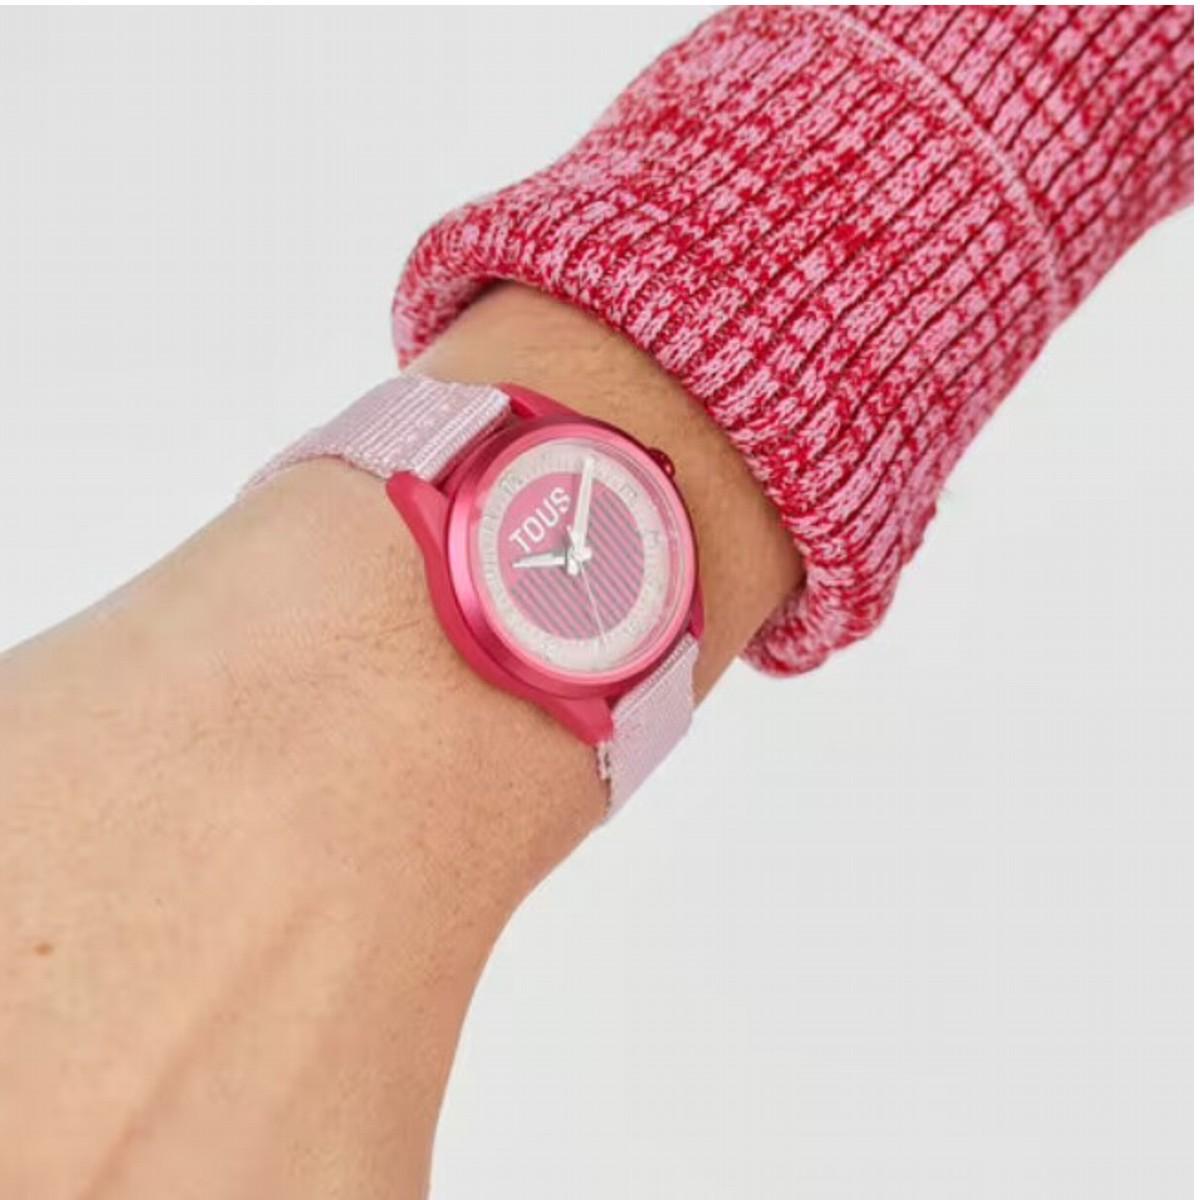 PINK VIBRANT SUN TOUS WATCH FOR KIDS 200351086